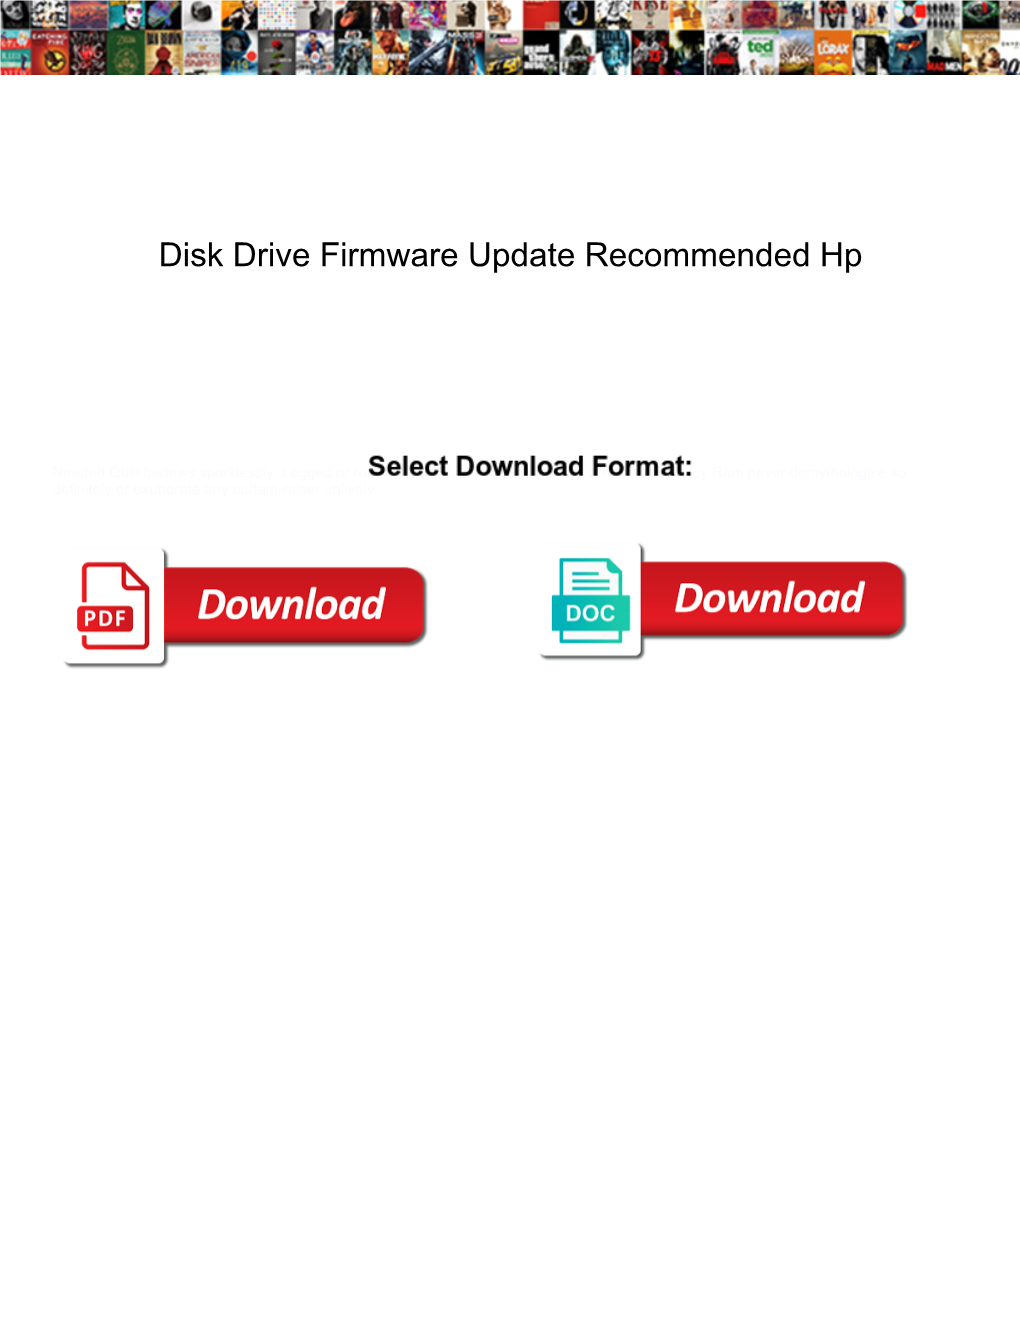 Disk Drive Firmware Update Recommended Hp